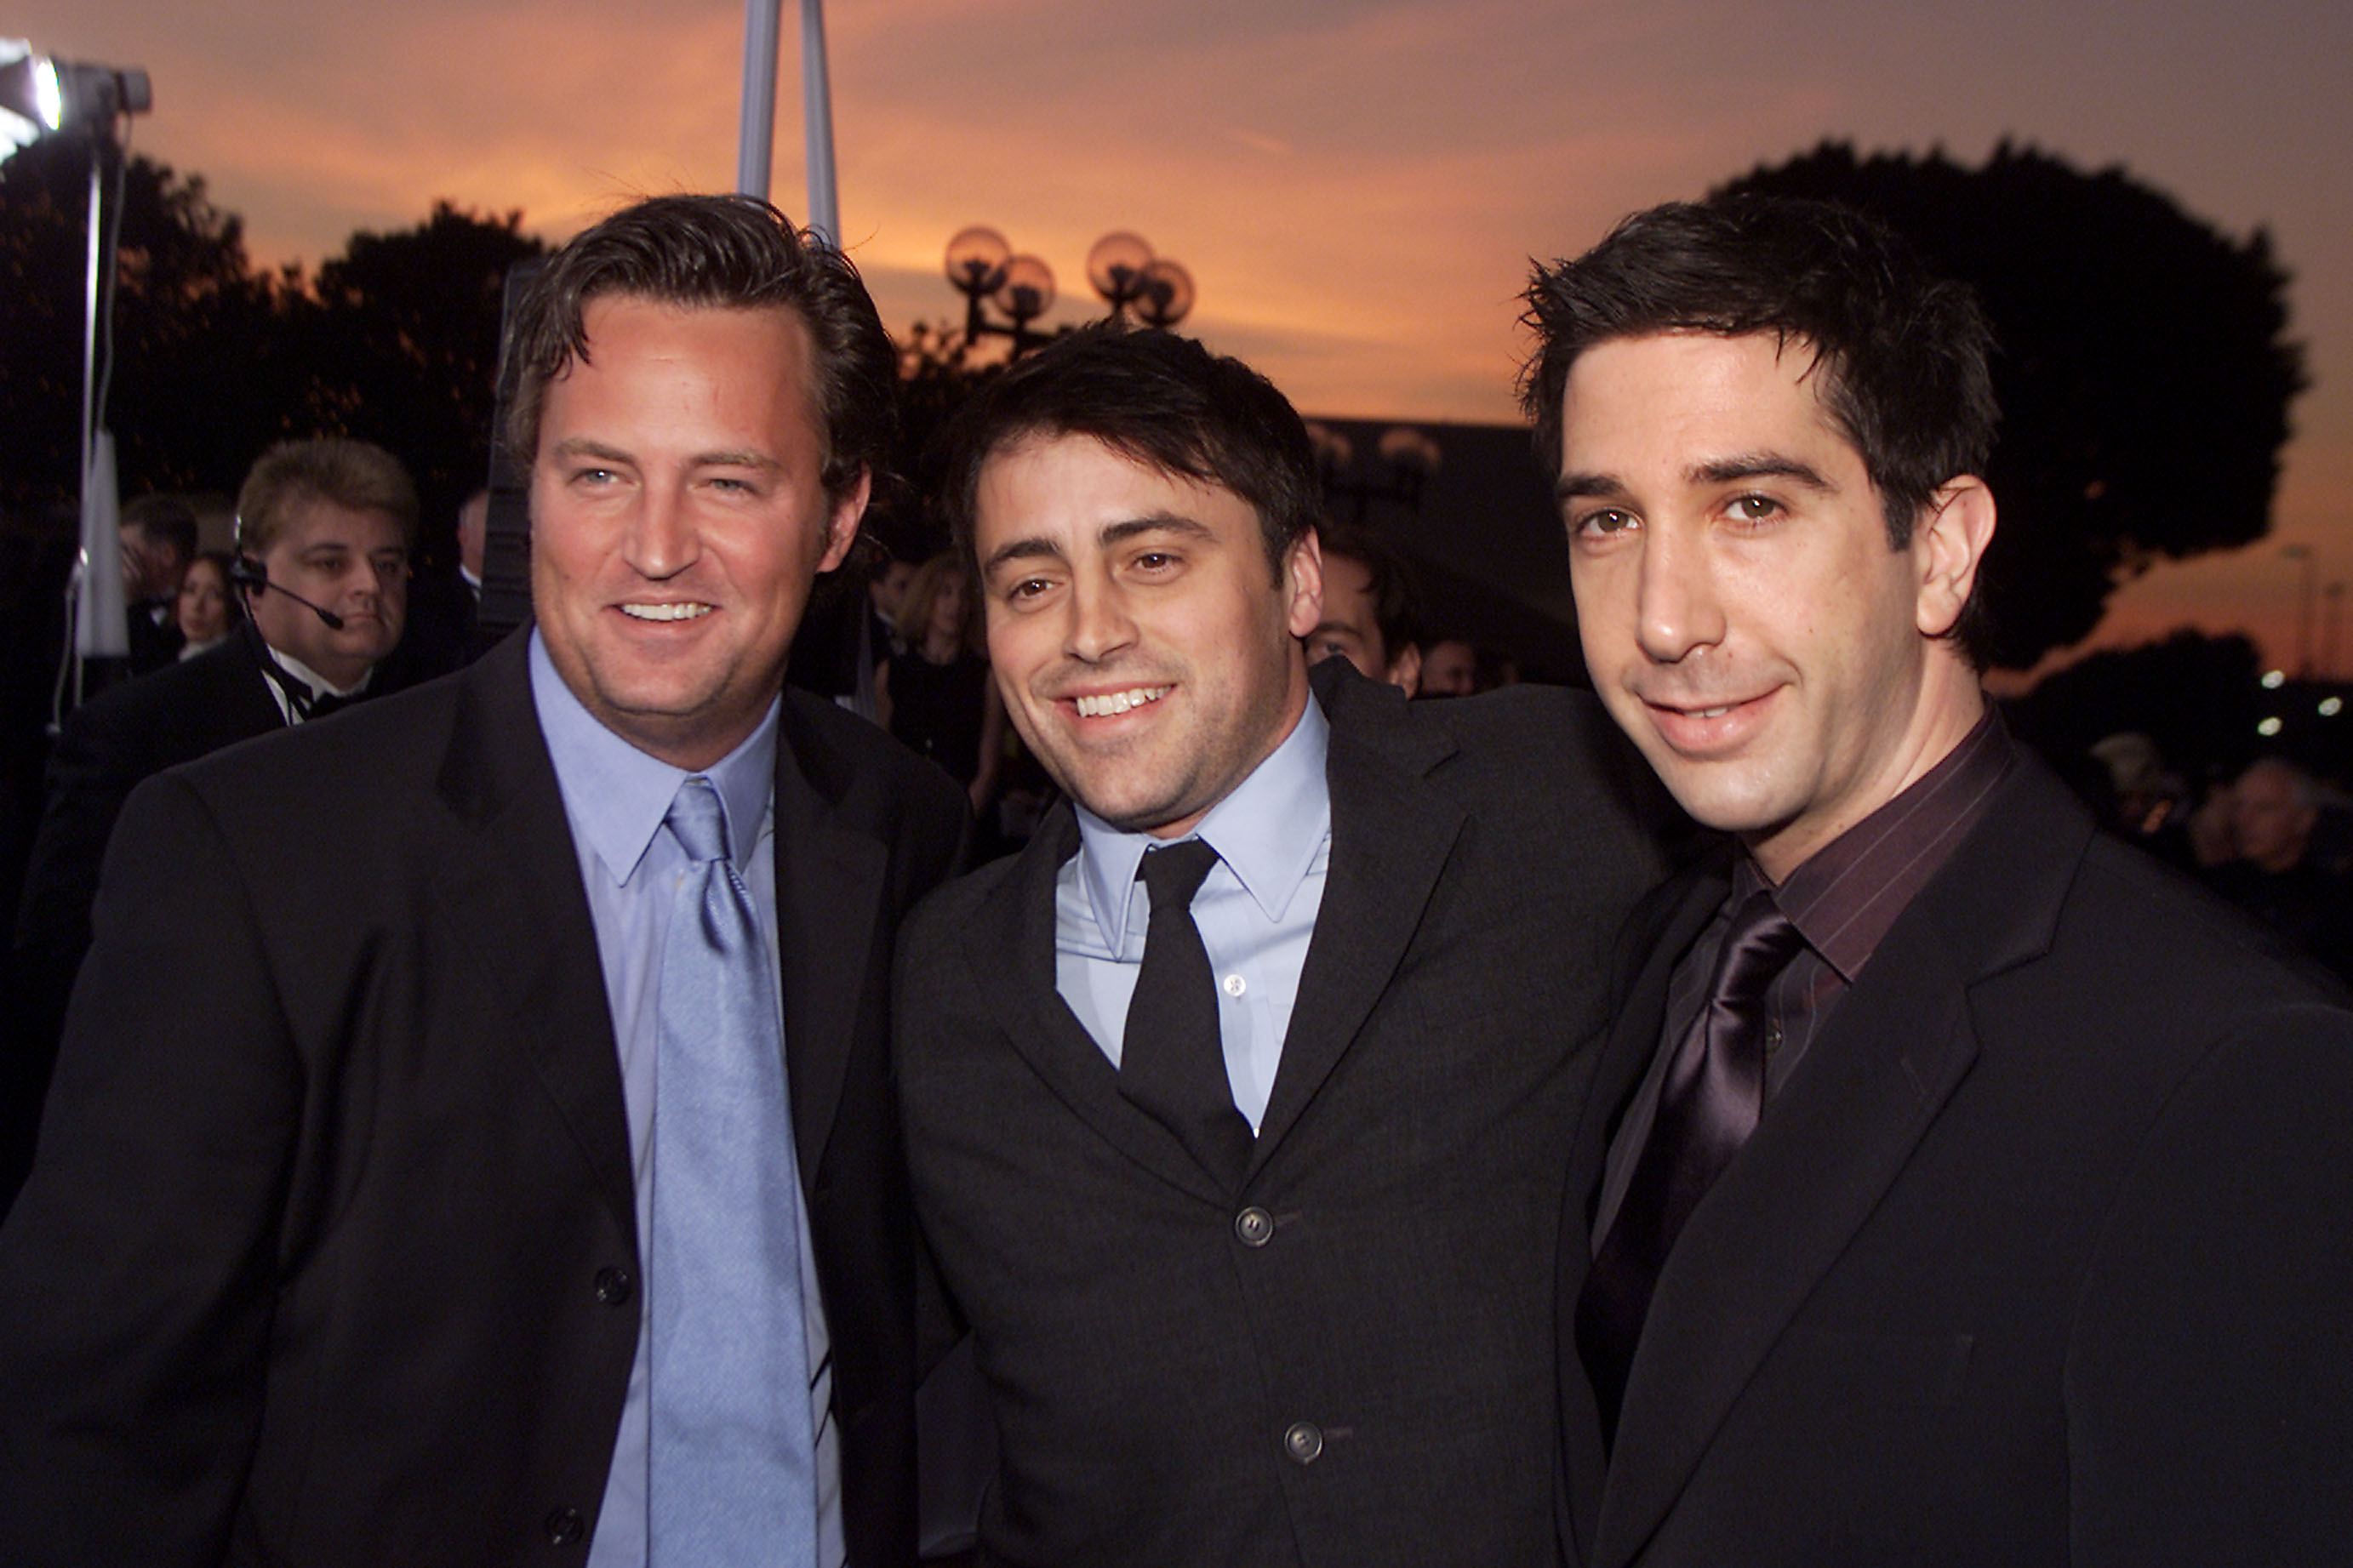 Matthew Perry, Matt LeBlanc, and David Schwimmer at the 28th Annual People's Choice Awards in Los Angeles, California on January 13, 2001 | Source: Getty Images